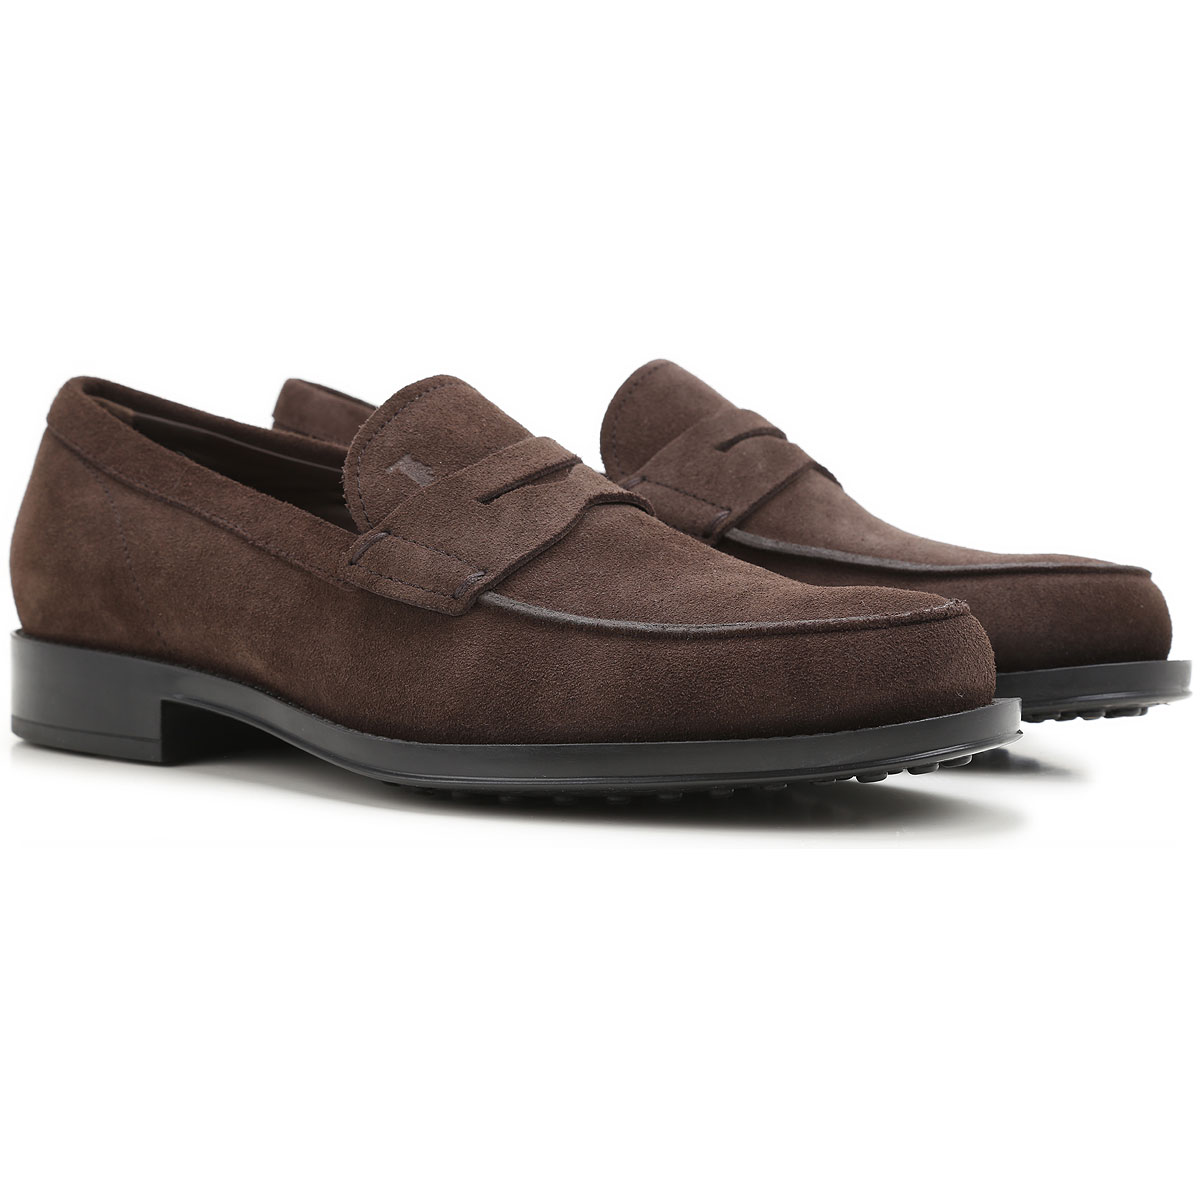 Mens Shoes Tods, Style code: xxm0ud006400p0s807--